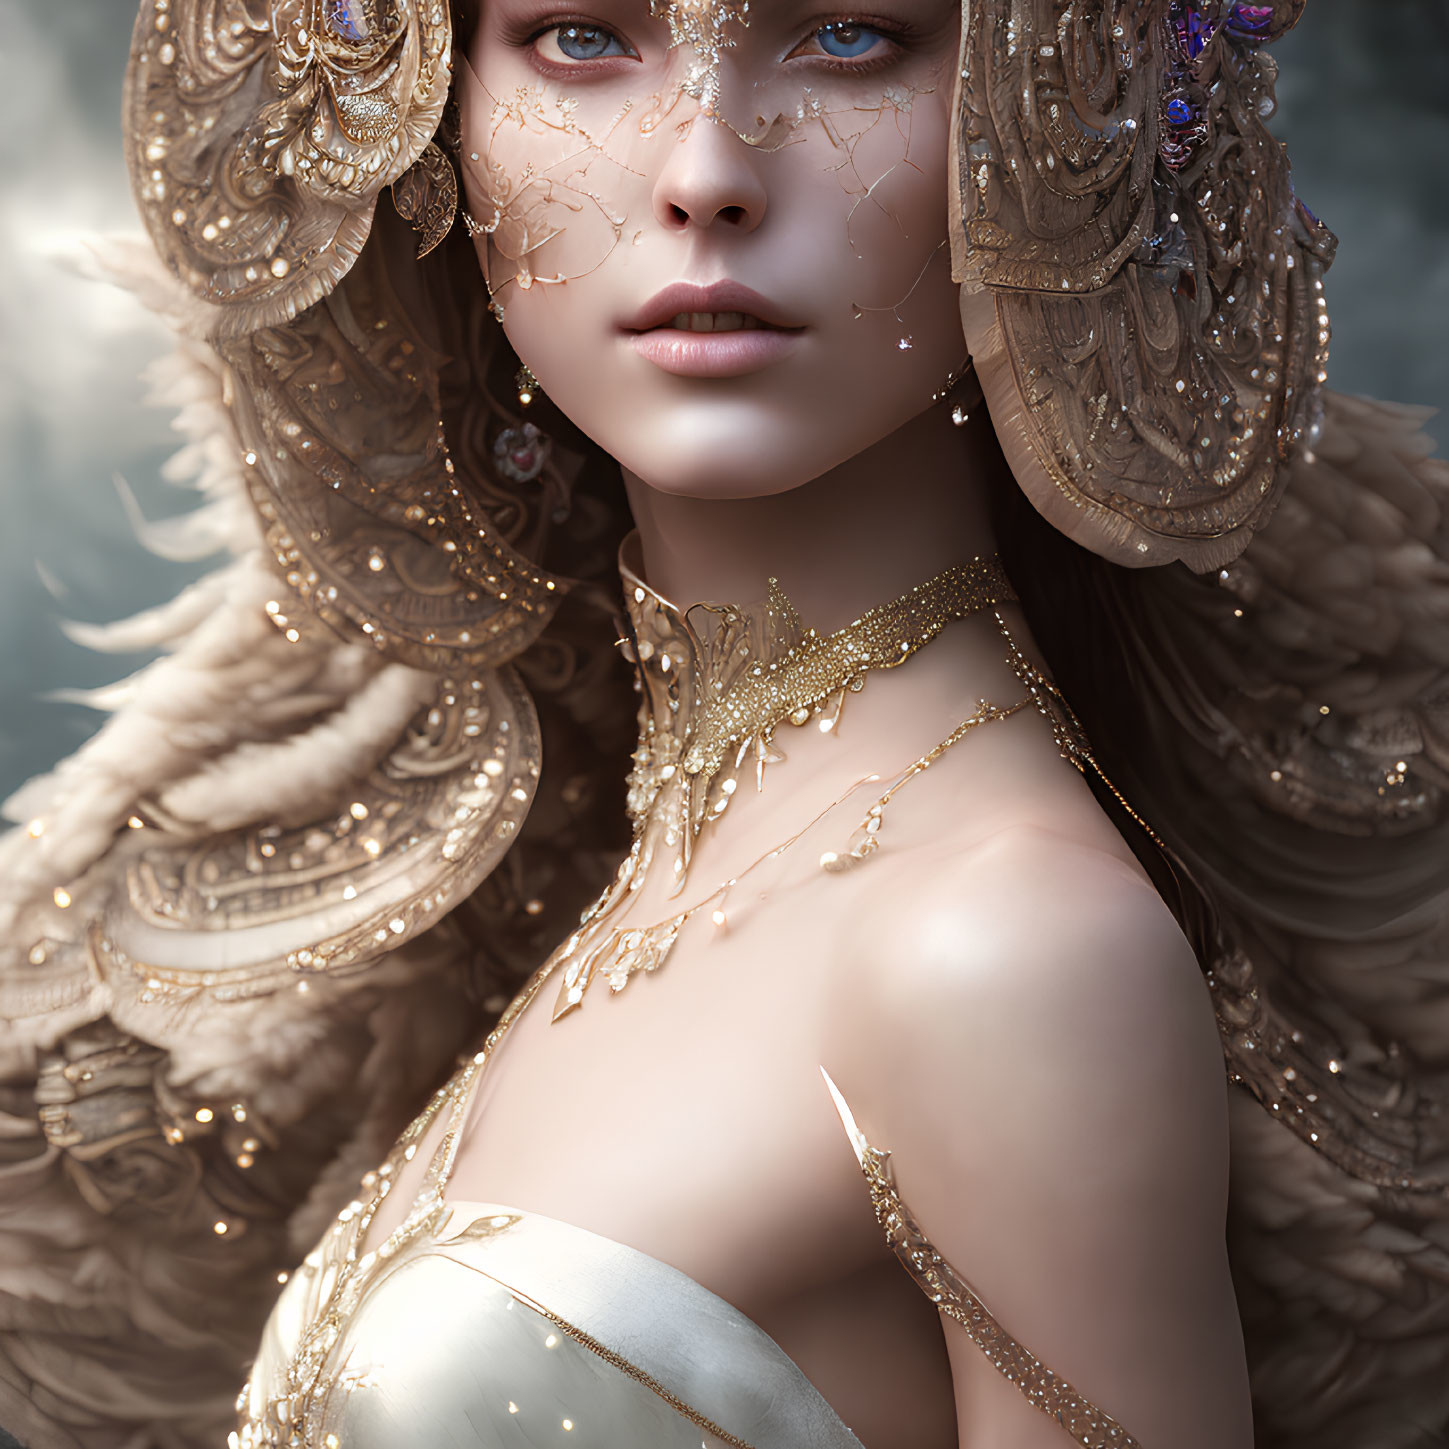 Intricate gold jewelry and ornate headdress on woman in digital artwork